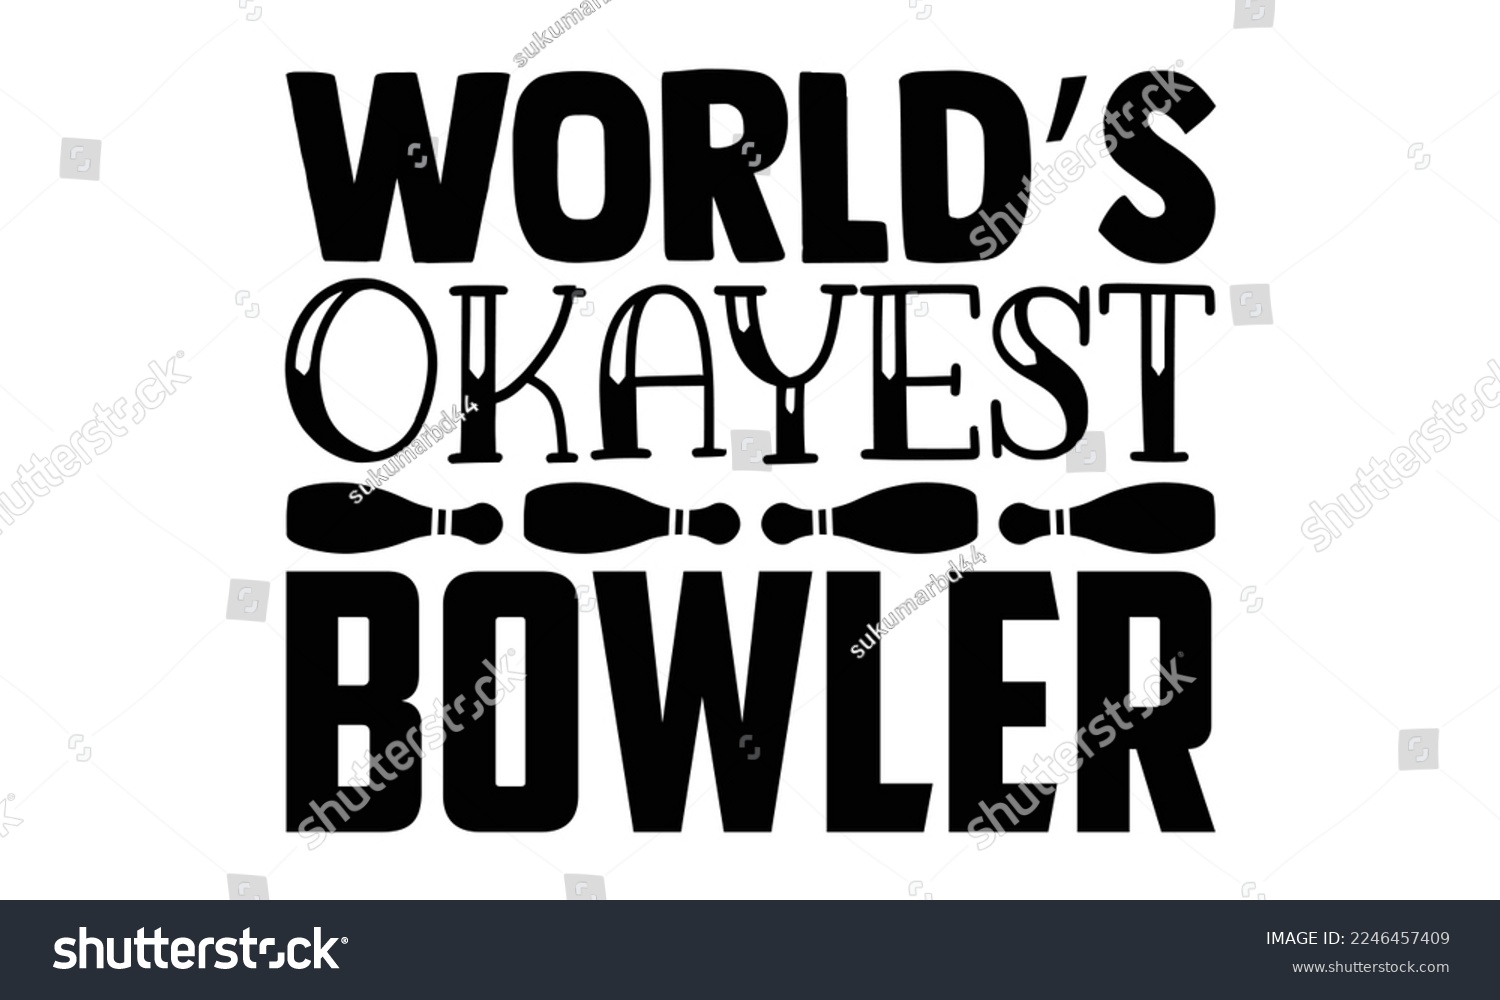 SVG of World’s Okayest Bowler - Bowling T-shirt Design, eps, svg Files for Cutting, Calligraphy graphic design, Hand drawn lettering phrase isolated on white background svg